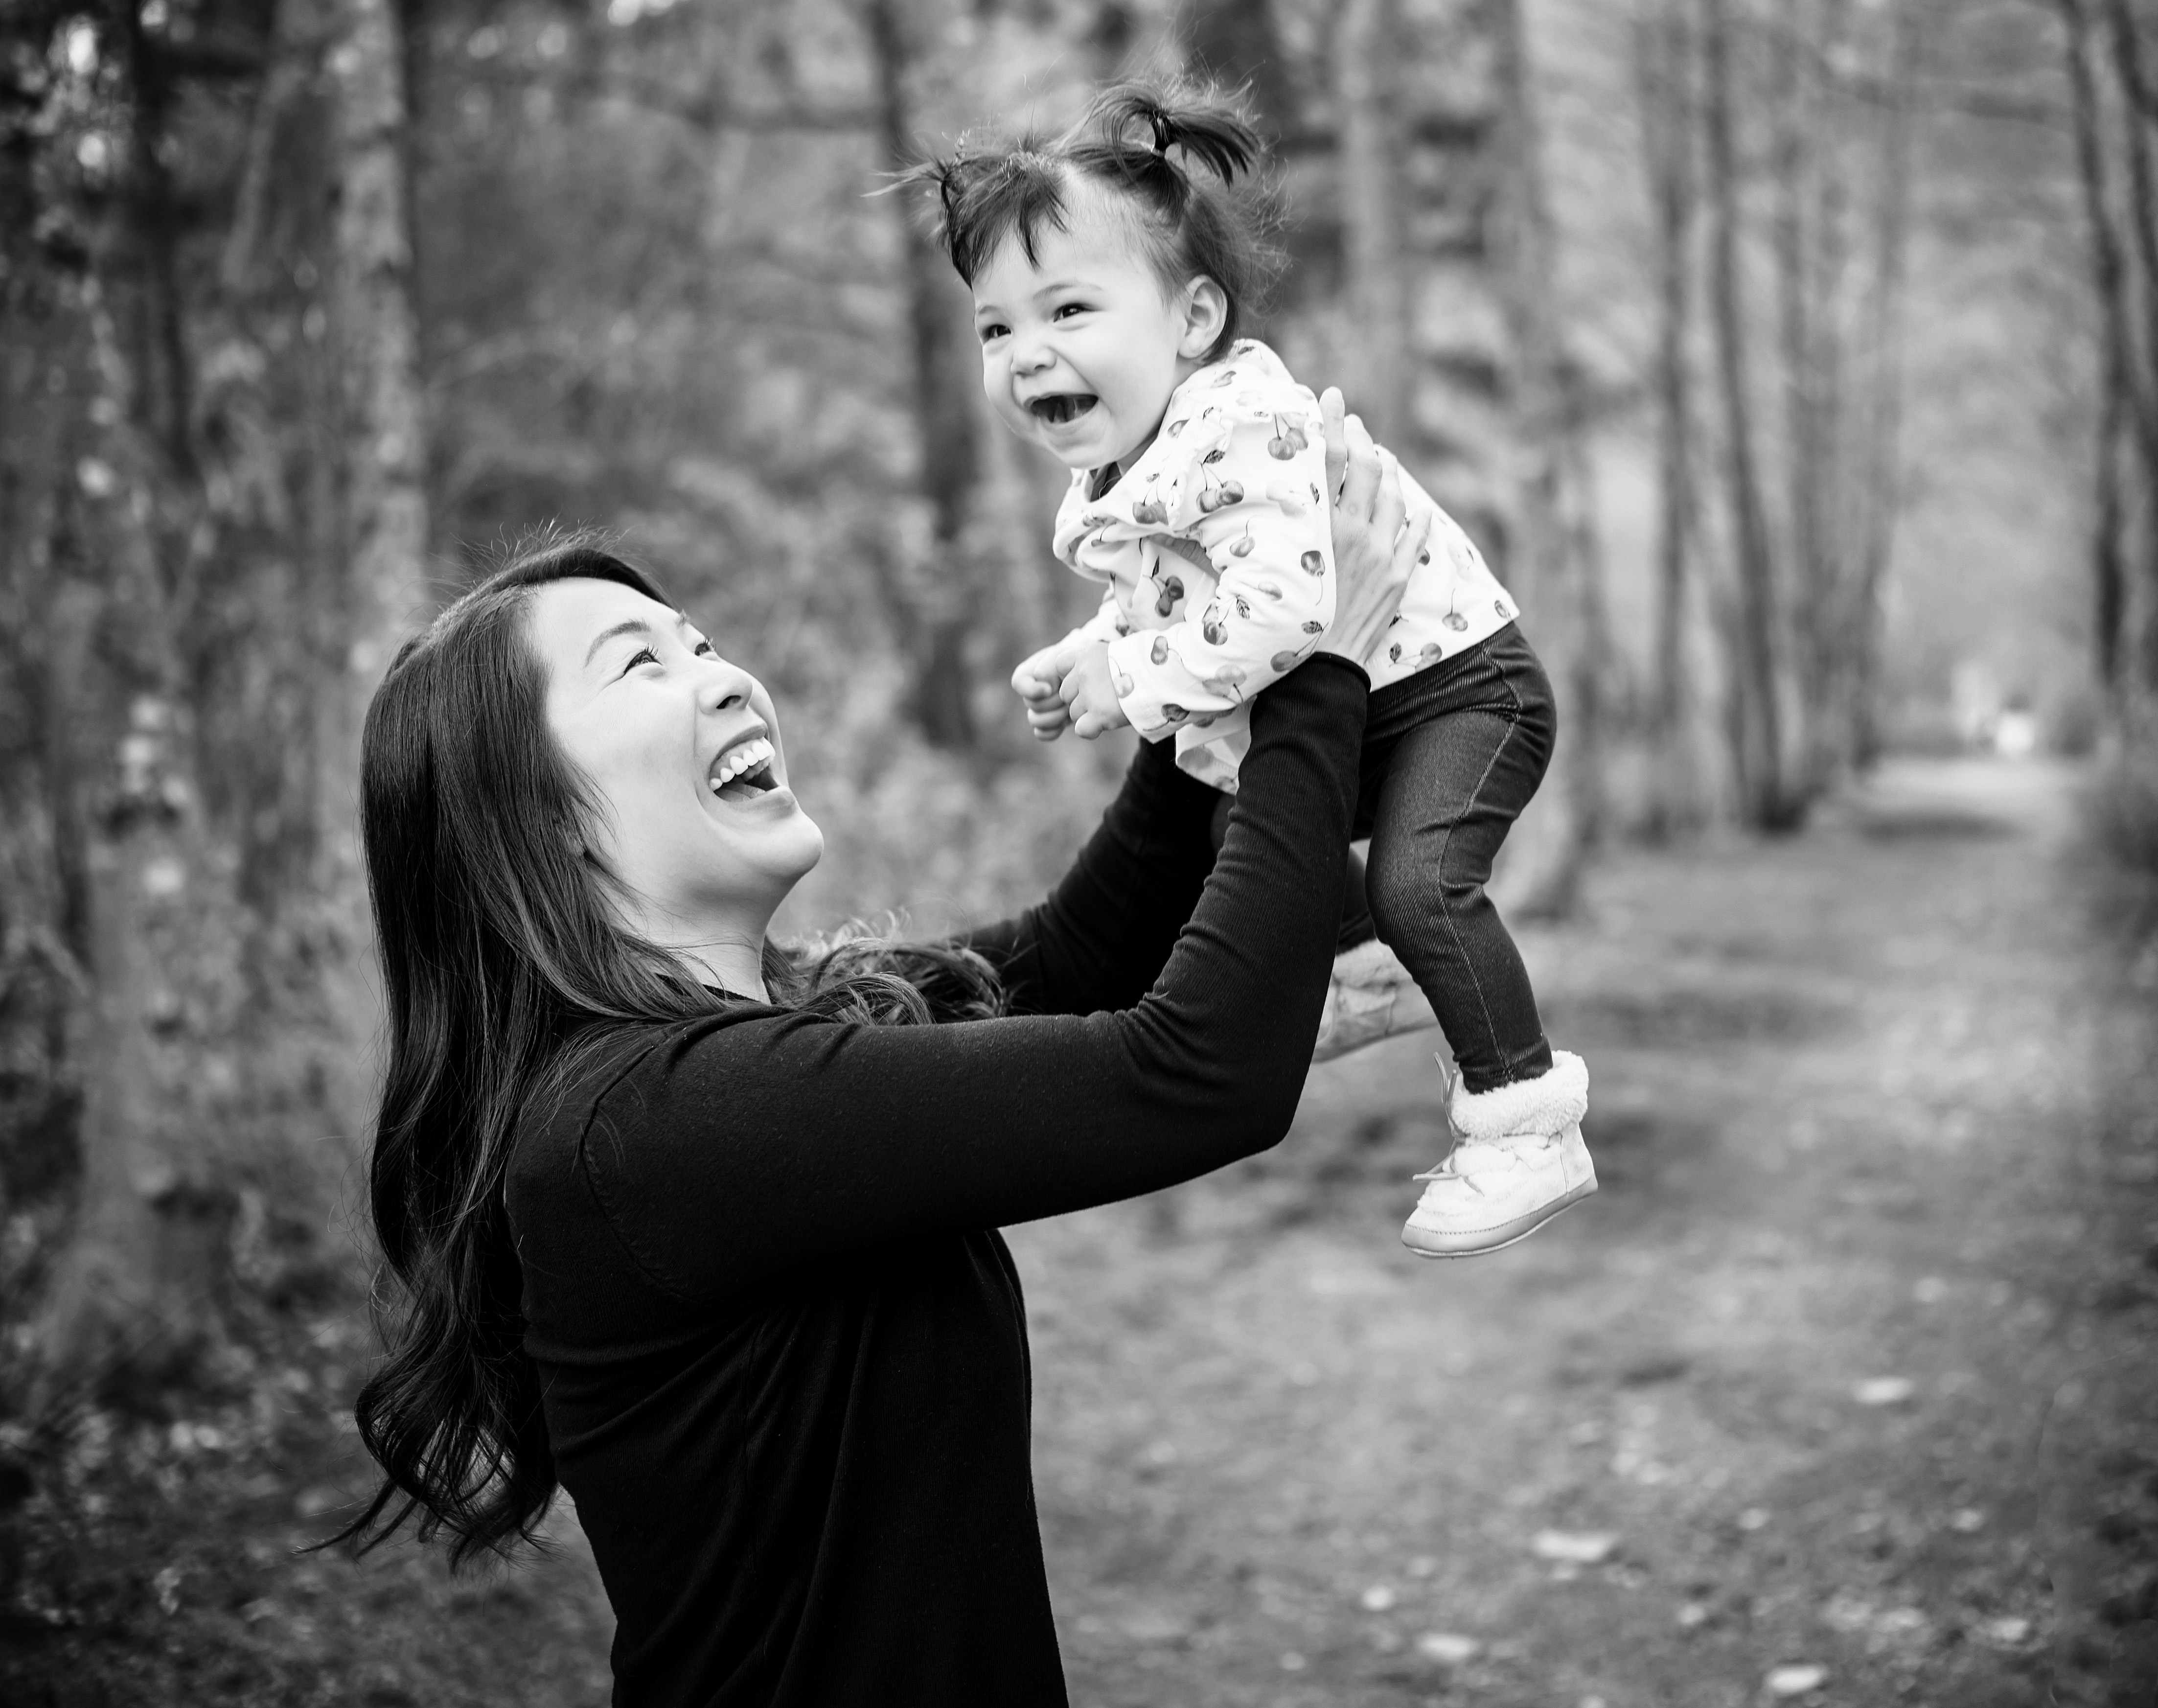 Squamish realtor Fiona Yu with her nine month old baby Rose near the Squamish Estuary townhouses. Wednesday, April 6th, 2022.